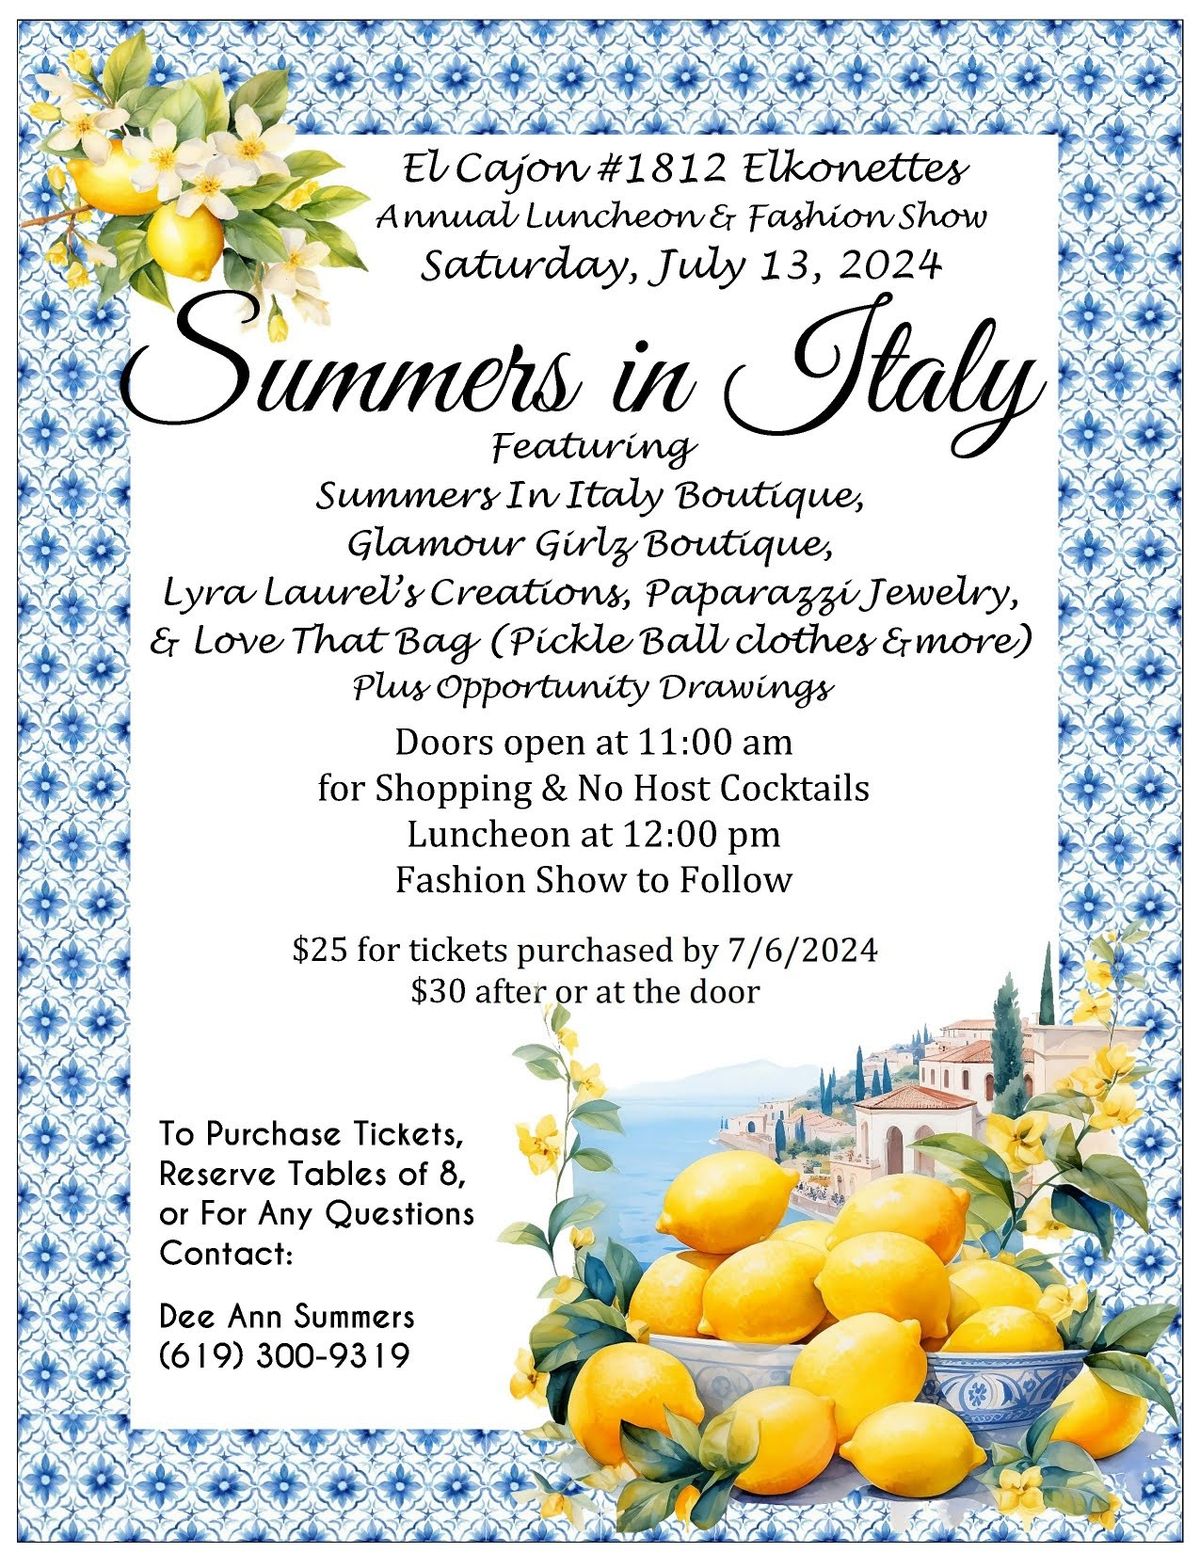 Summers in Italy Fashion Show